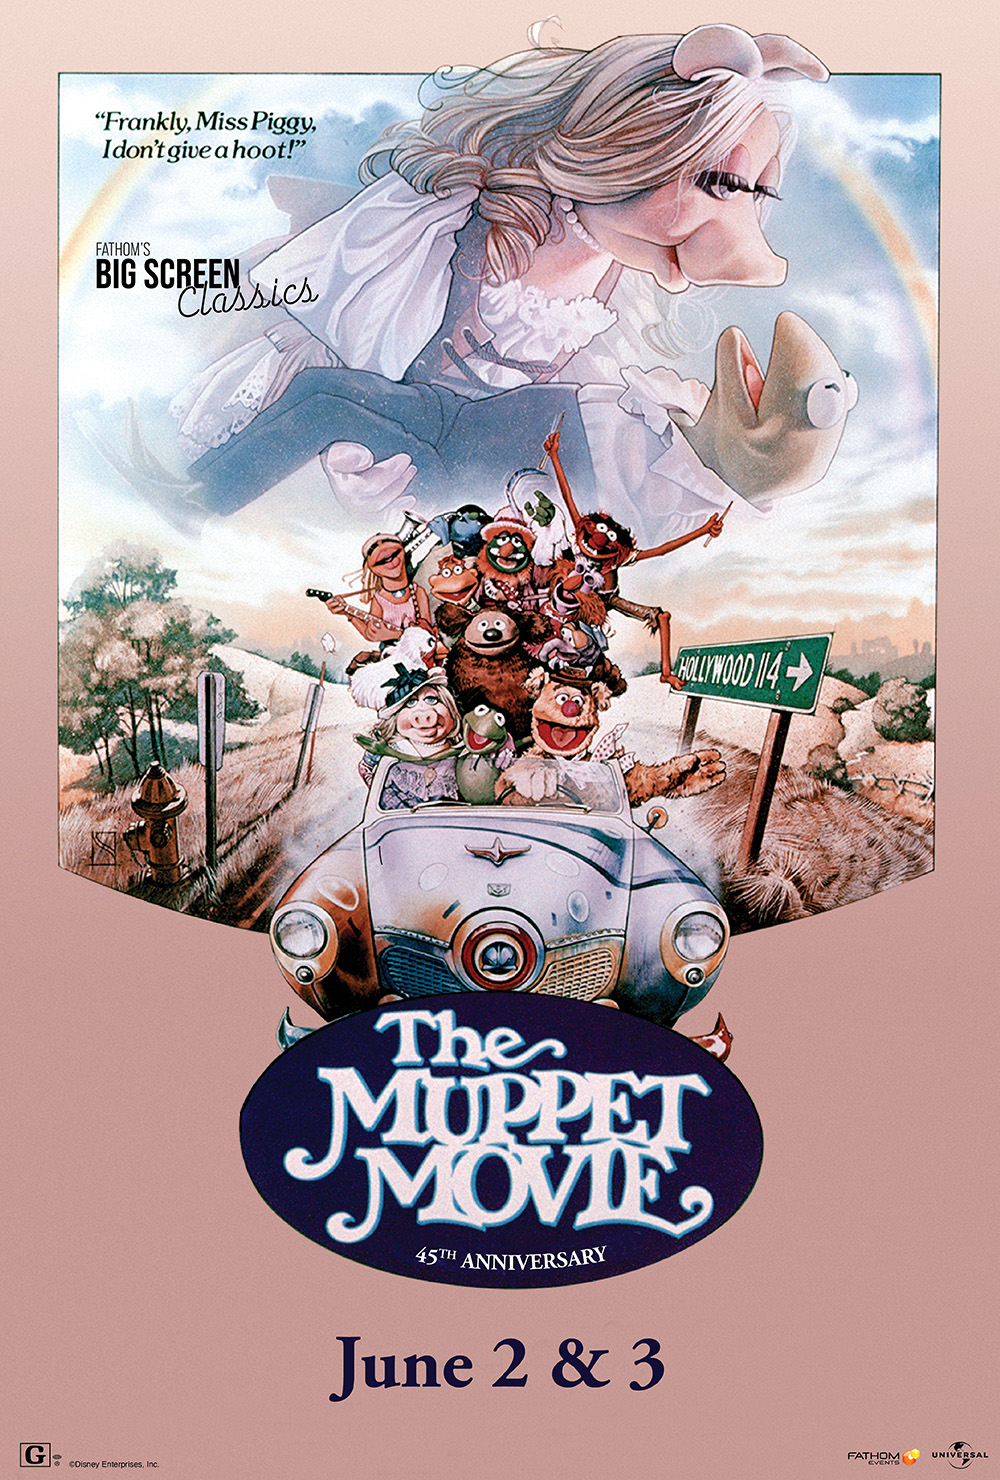 Universal Pictures and Fathom Events Add ‘The Muppet Movie’ to the 2024 Slate of Fathom’s Big Screen Classics Film Series in Celebration of the Film’s 45th Anniversary